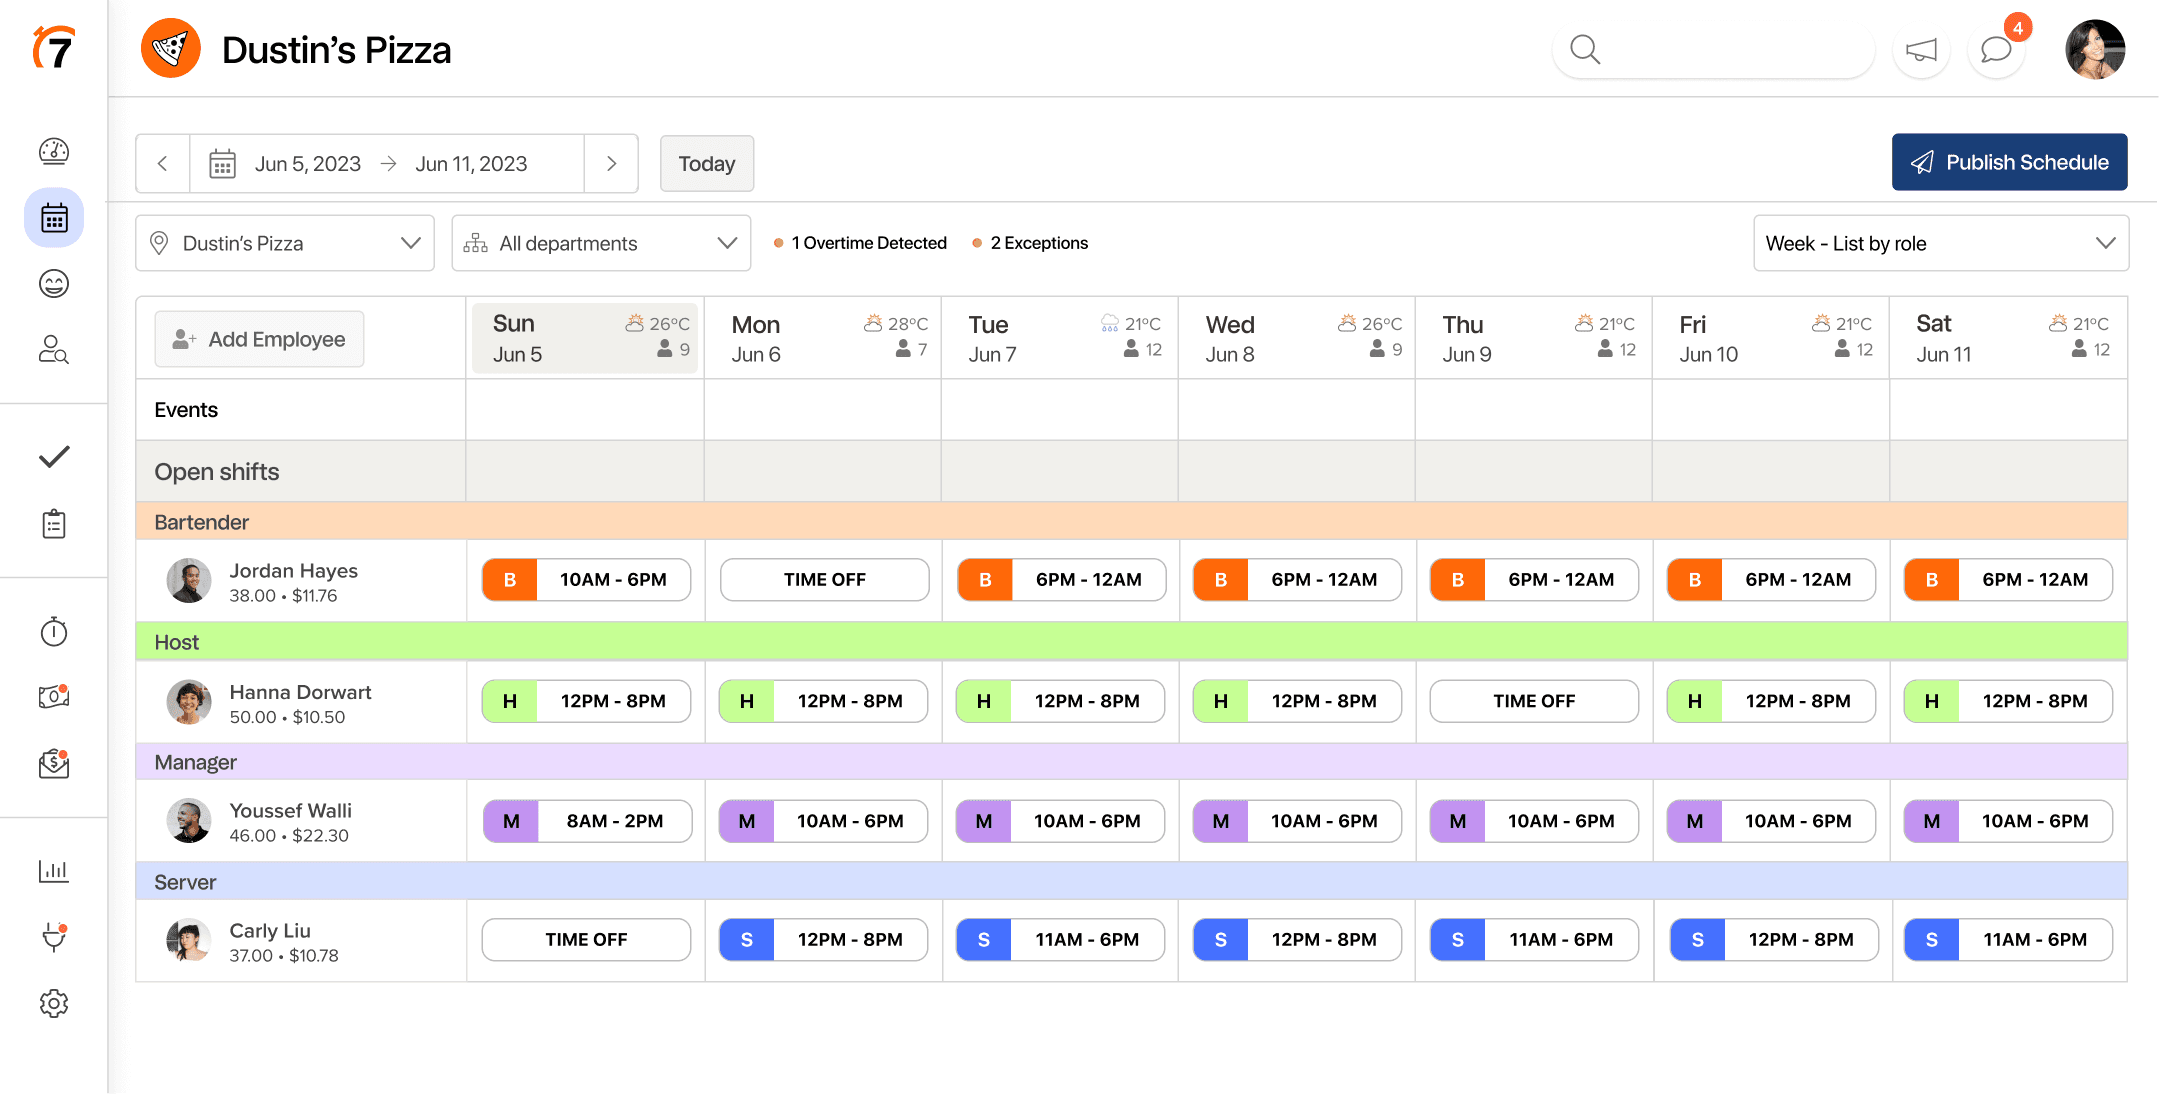 Schedule view of 7shifts